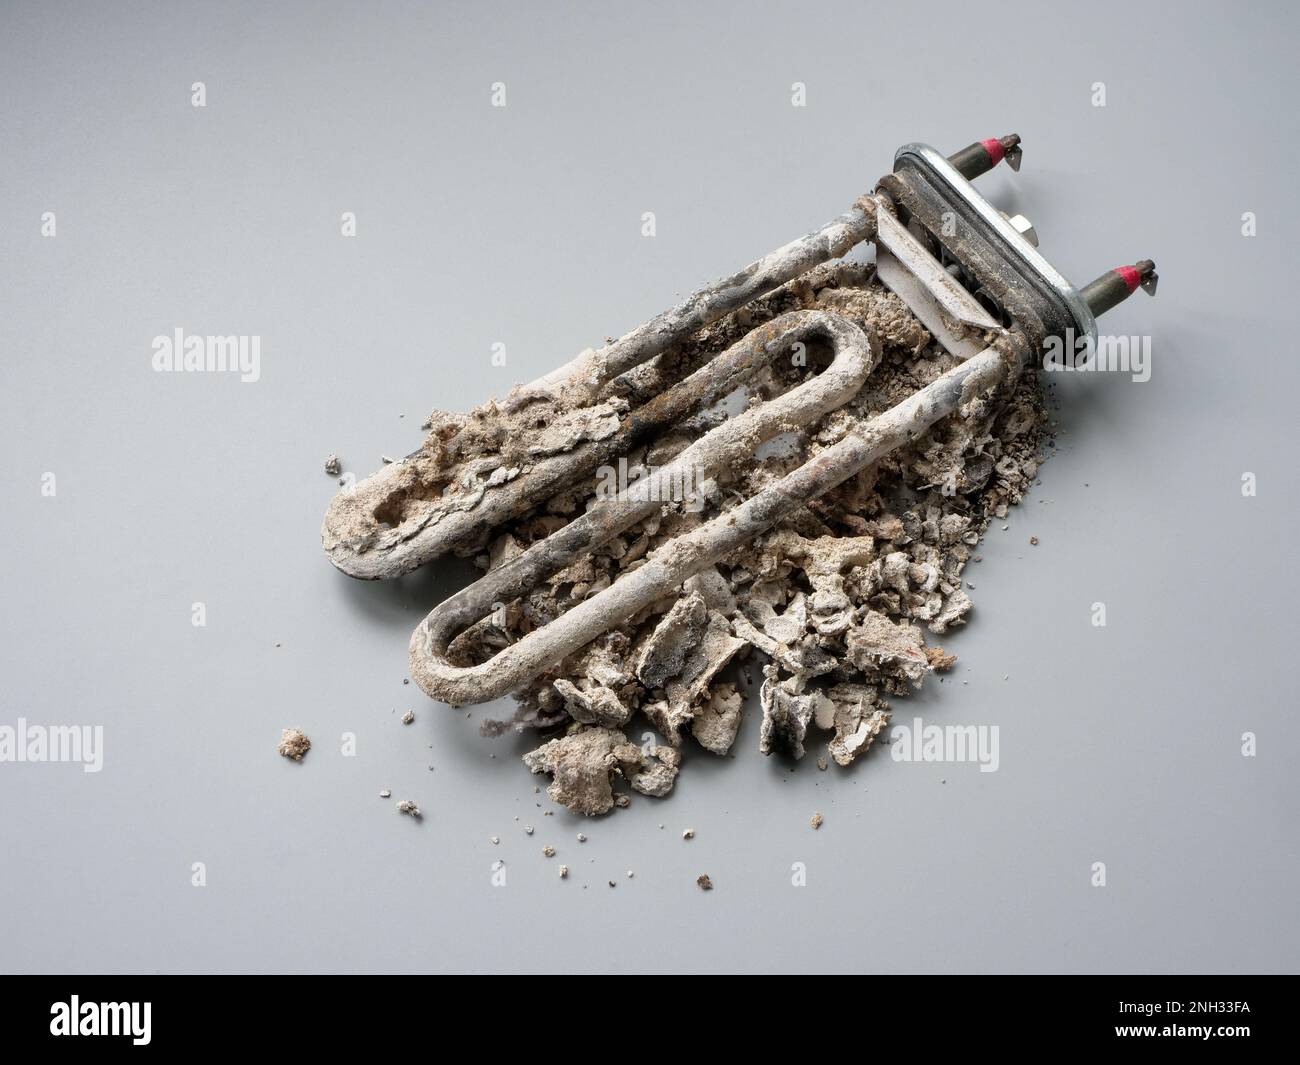 Burnt out, broken heating element of a washing machine or boiler. Stock Photo